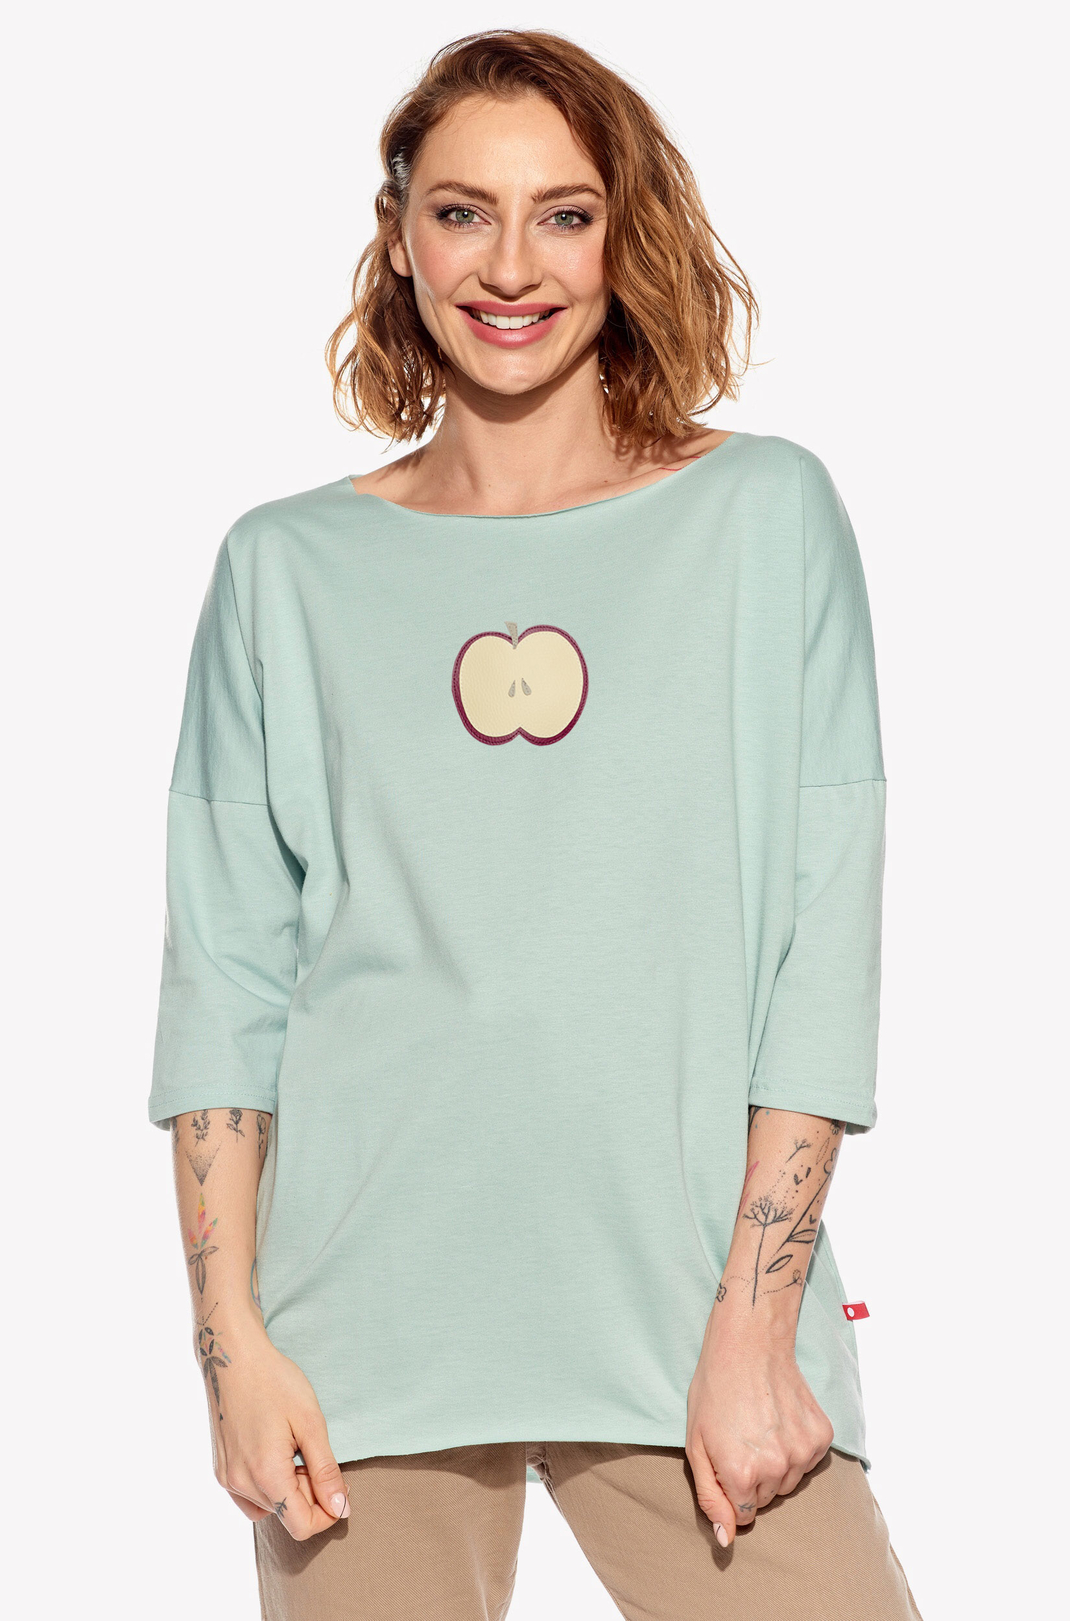 Shirt with apple